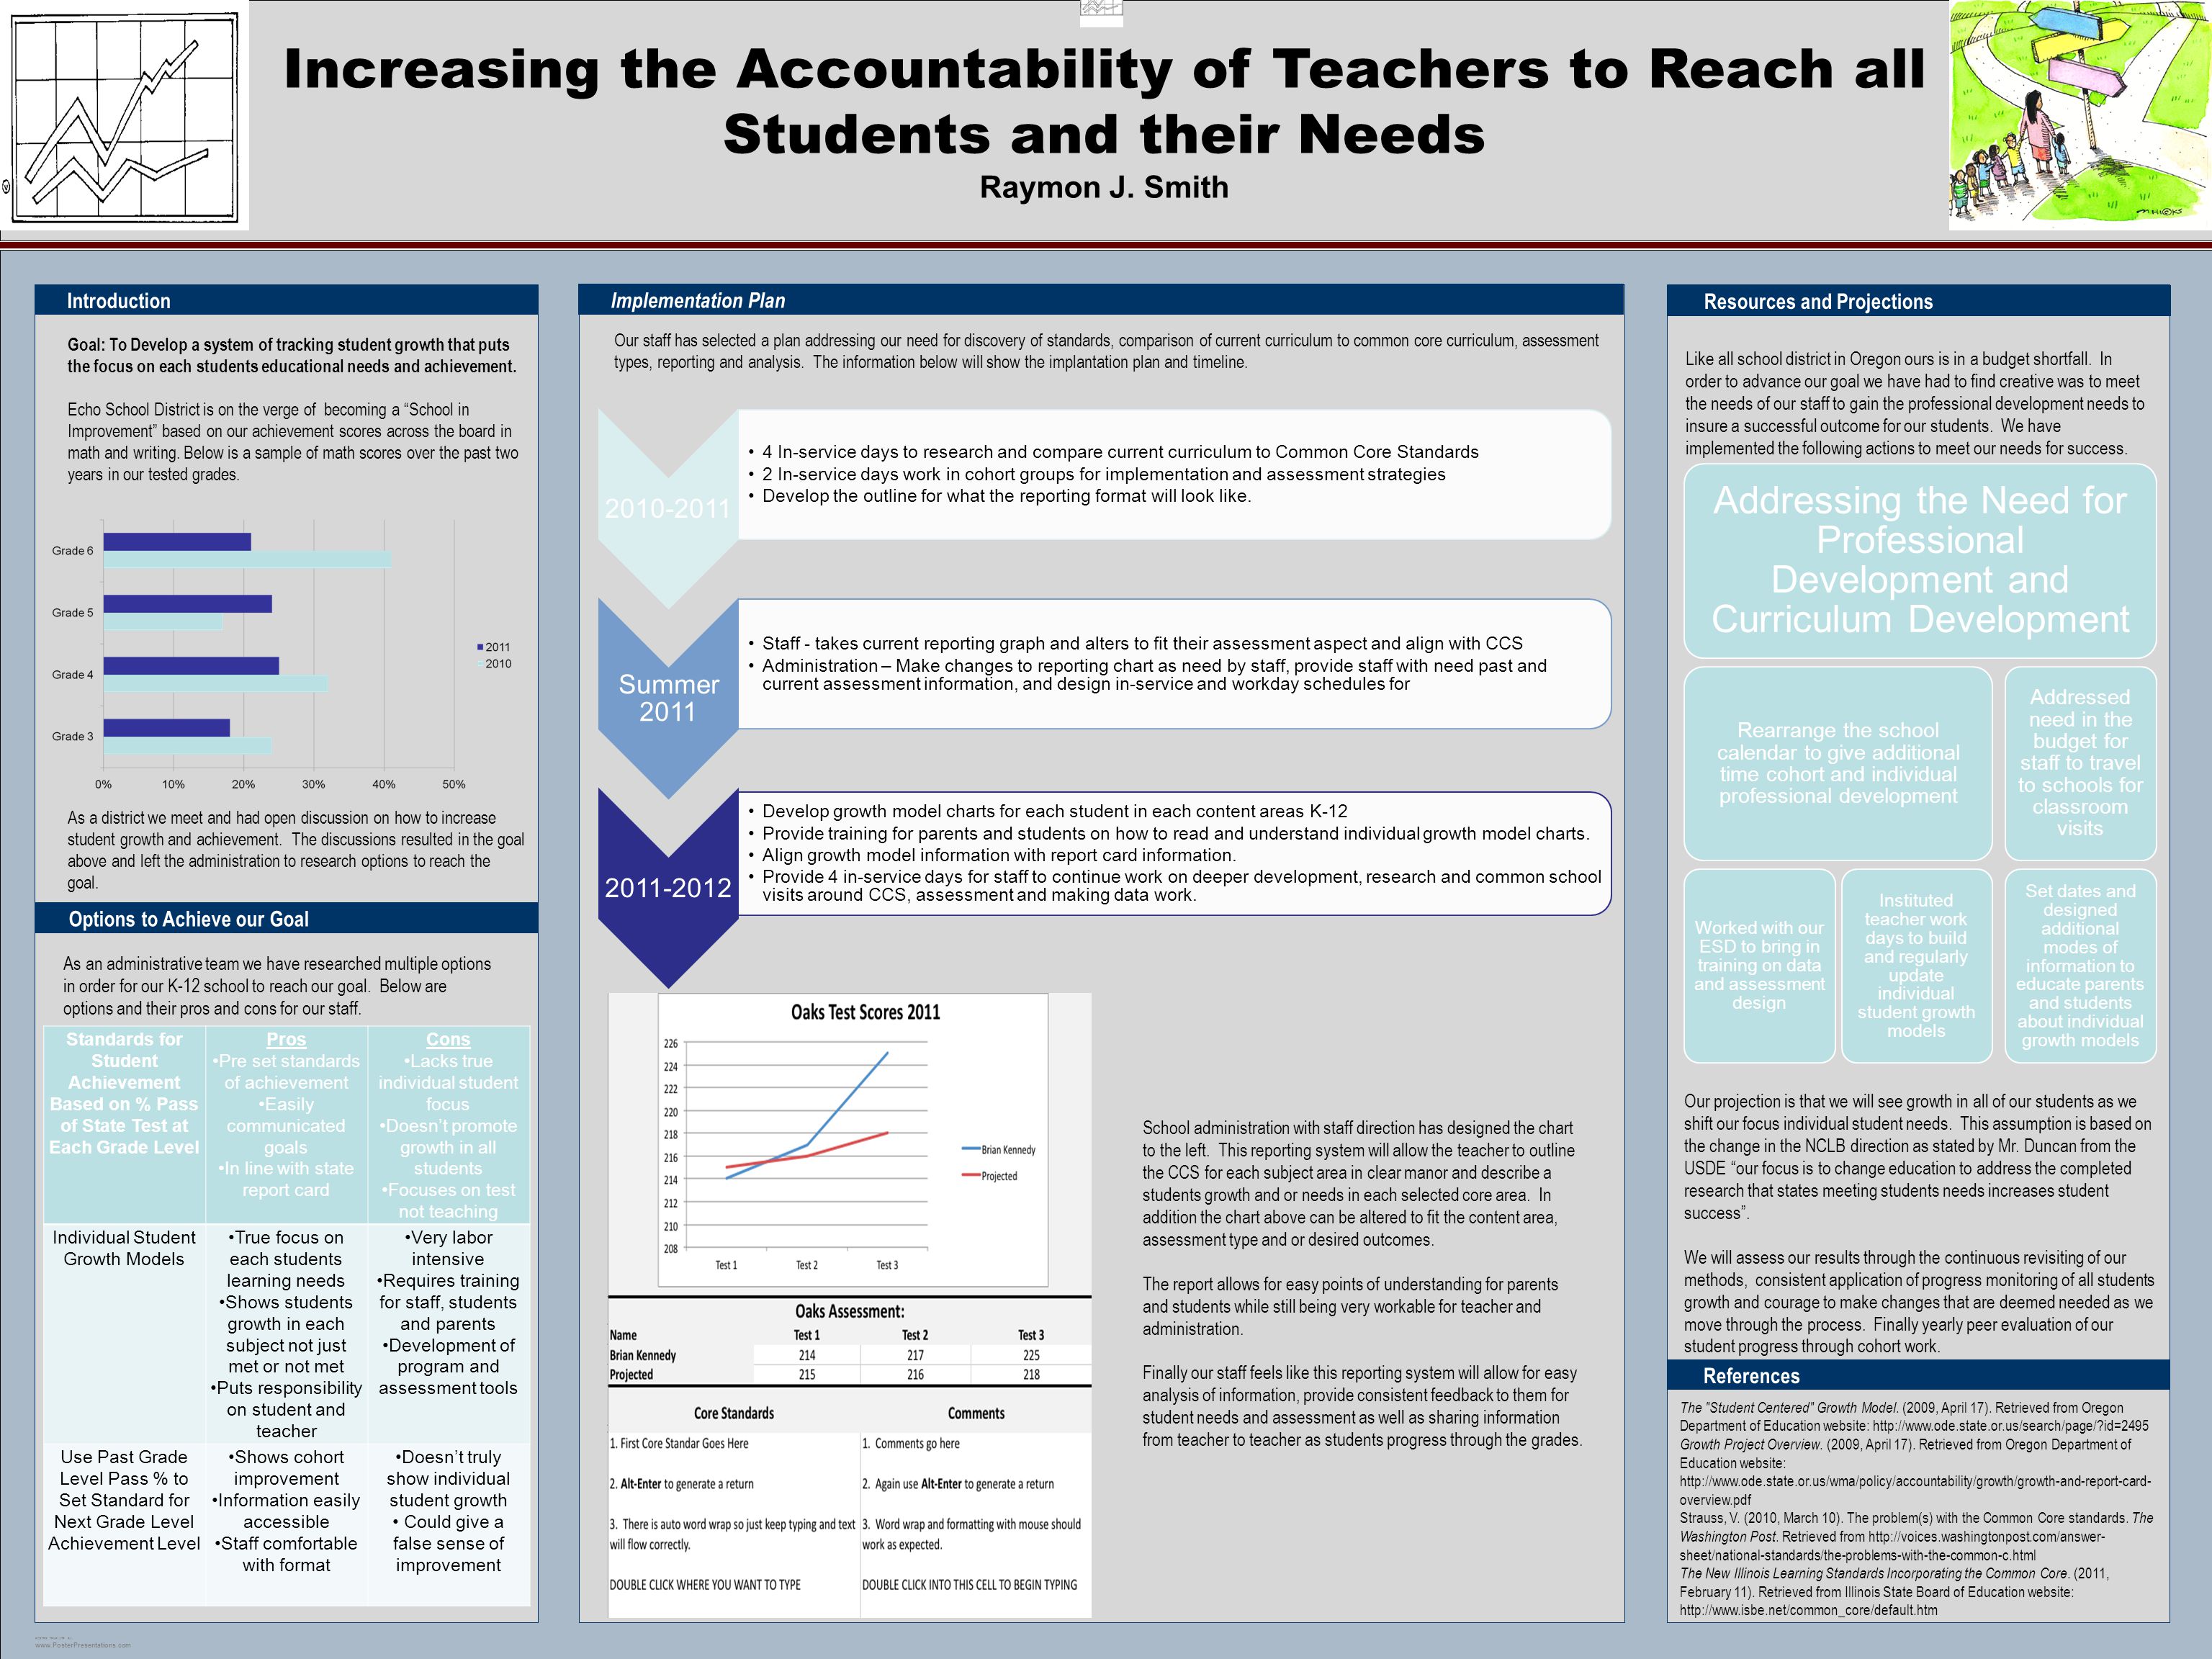 POSTER TEMPLATE BY:   Increasing the Accountability of Teachers to Reach all Students and their Needs Raymon J.